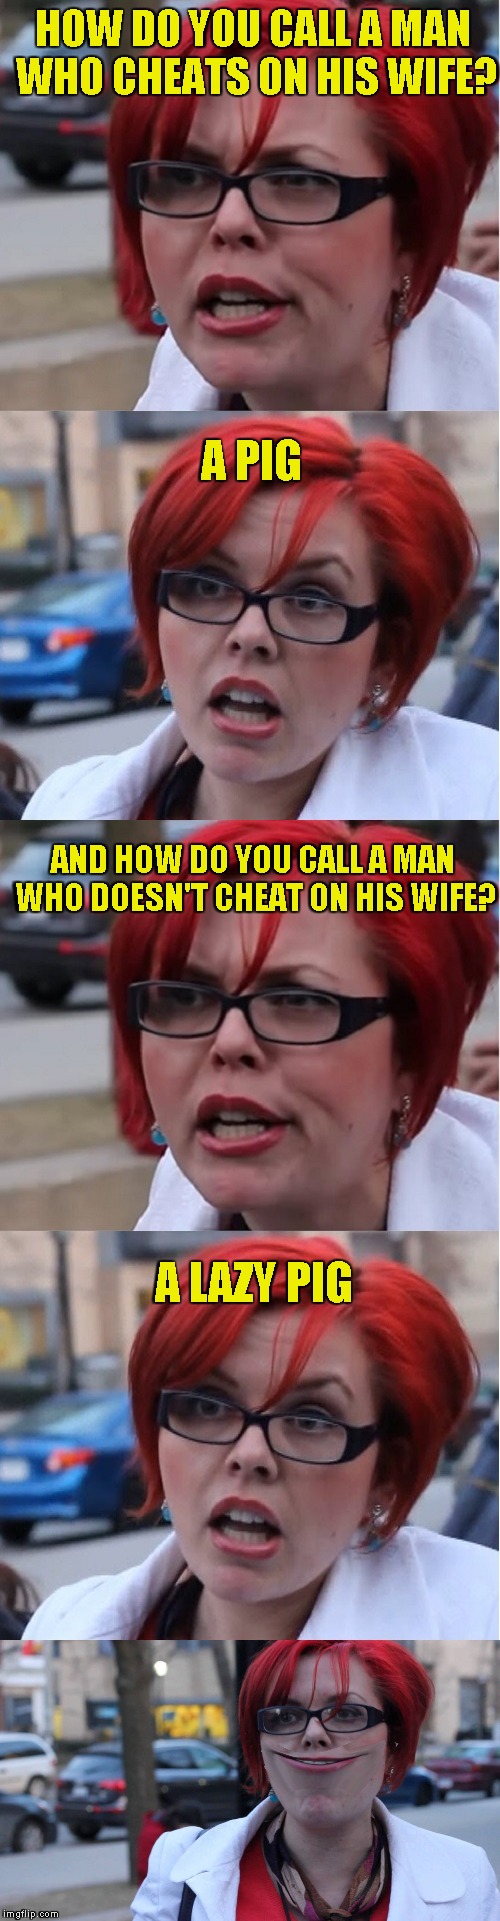 HOW DO YOU CALL A MAN WHO CHEATS ON HIS WIFE? A PIG; AND HOW DO YOU CALL A MAN WHO DOESN'T CHEAT ON HIS WIFE? A LAZY PIG | image tagged in memes,bad pun,feminist,powermetalhead,funny,cheating | made w/ Imgflip meme maker